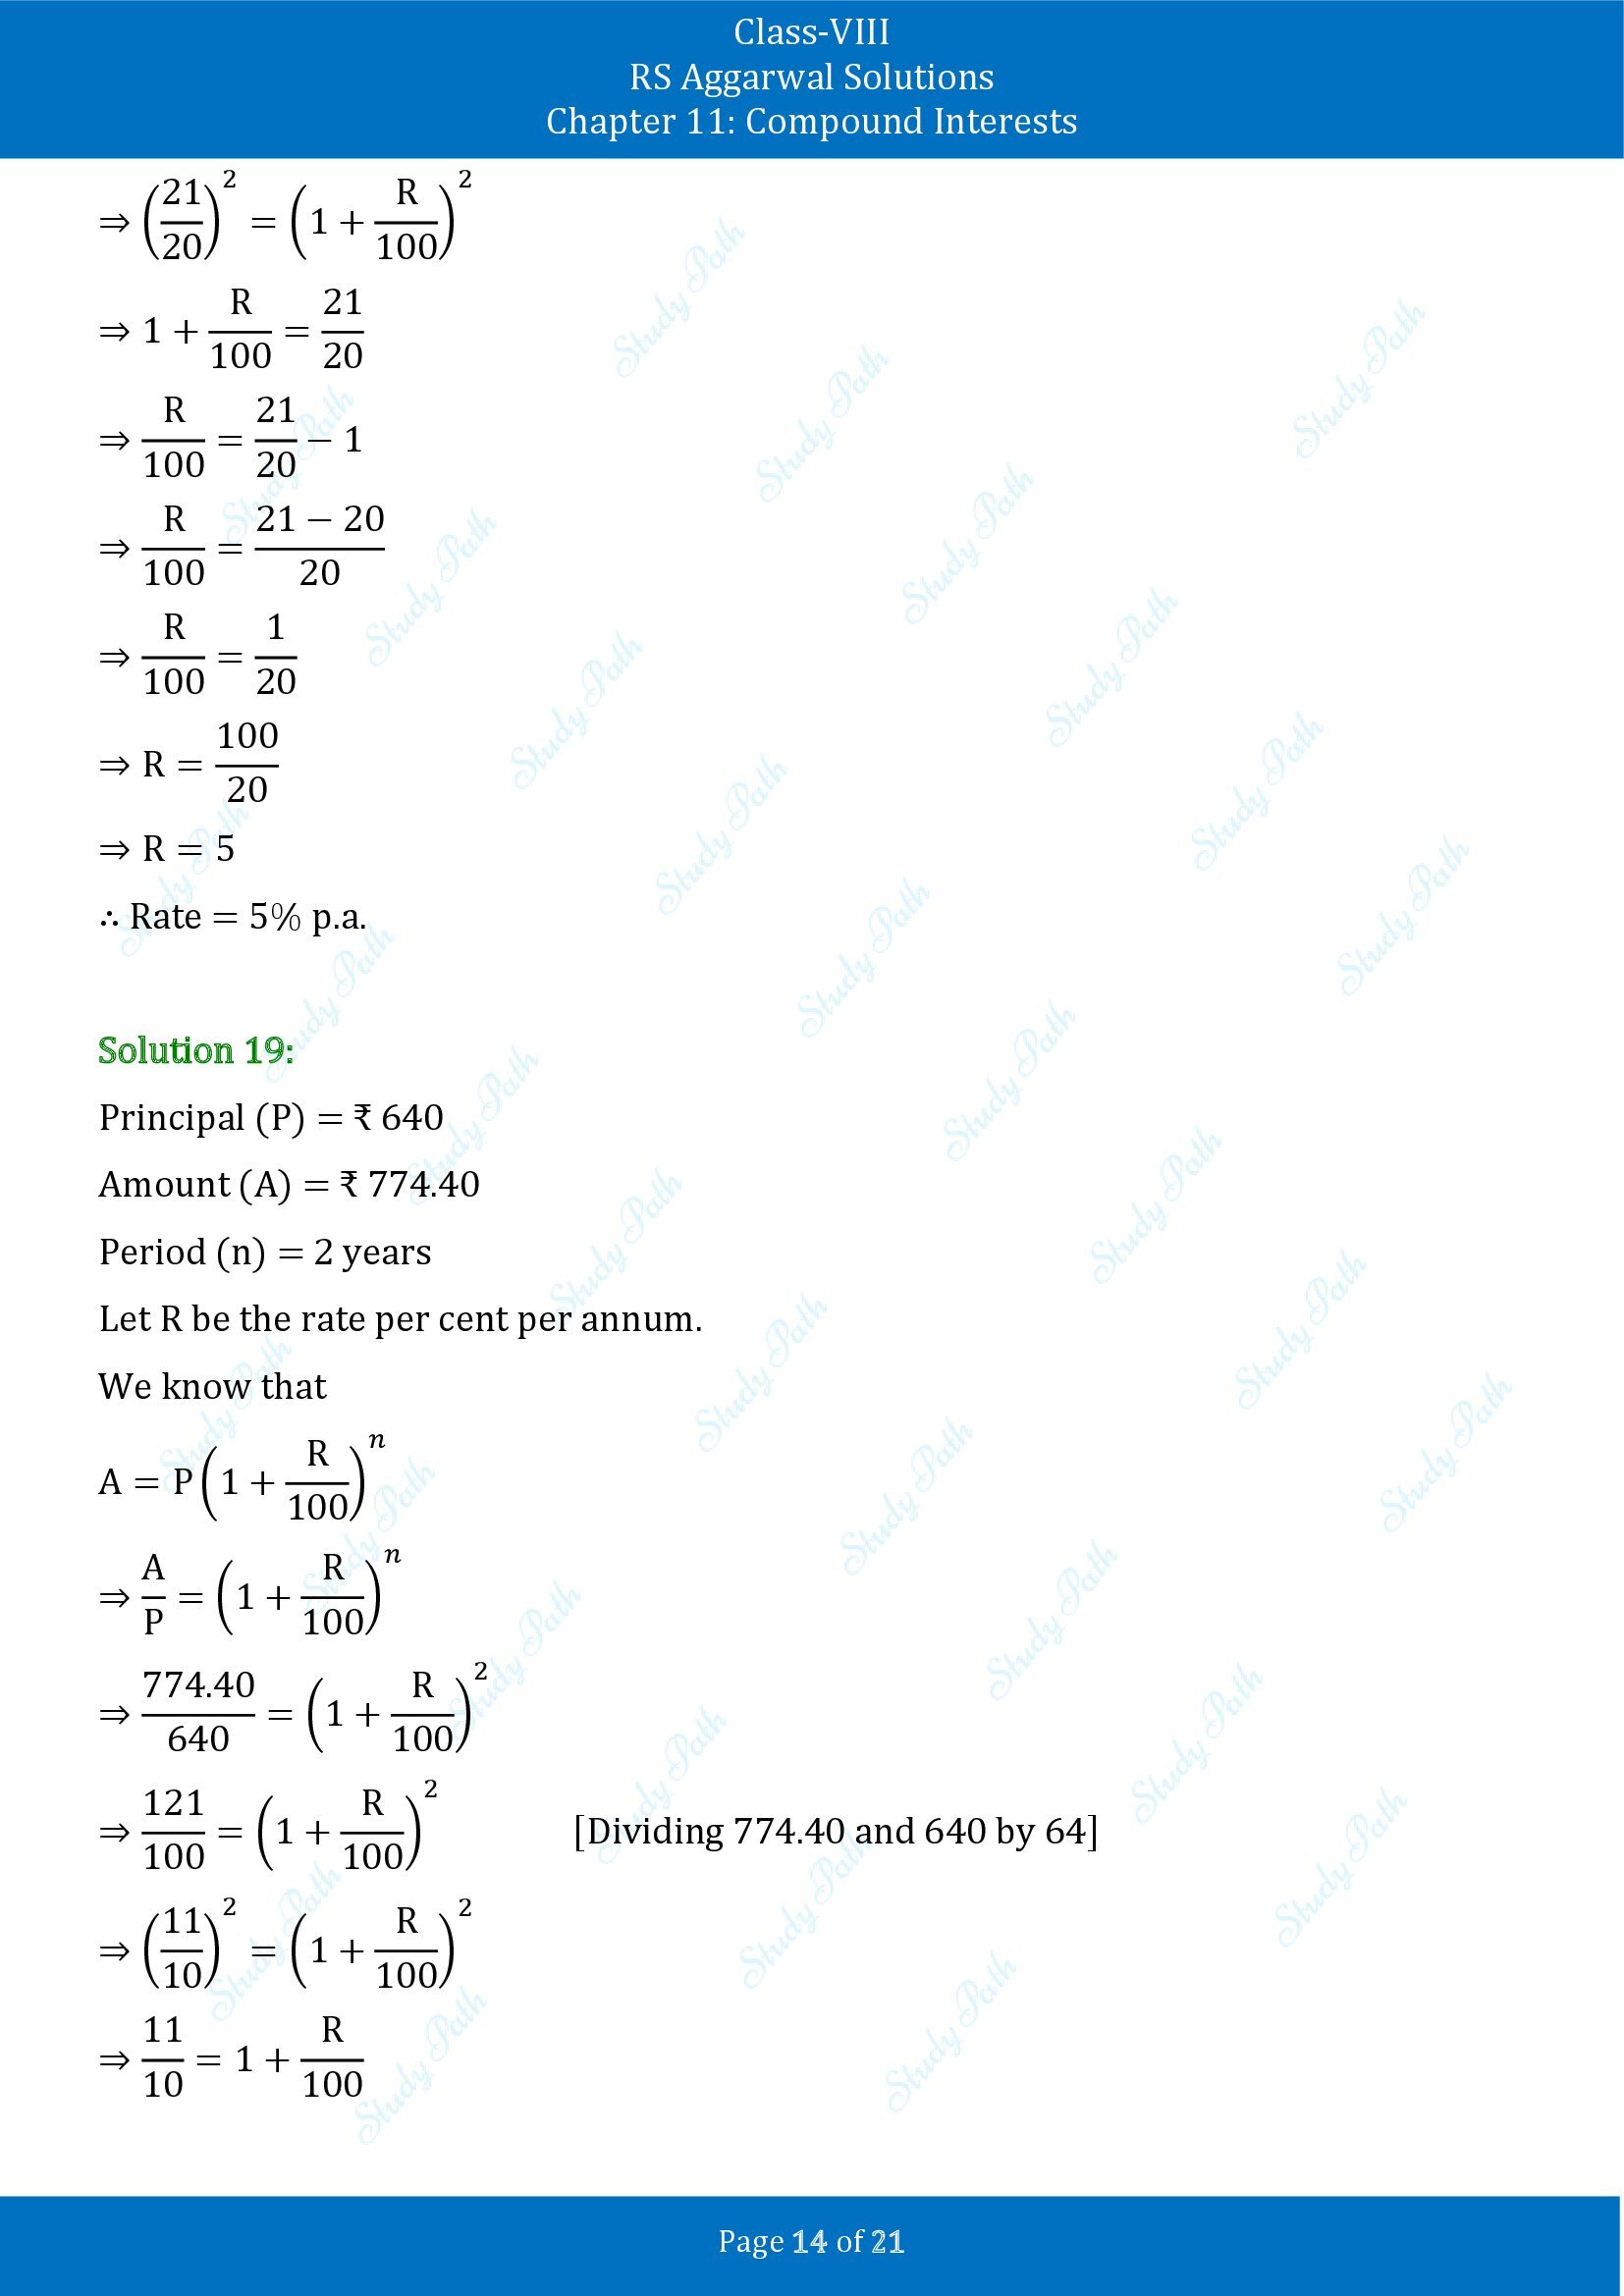 RS Aggarwal Solutions Class 8 Chapter 11 Compound Interests Exercise 11B 00014